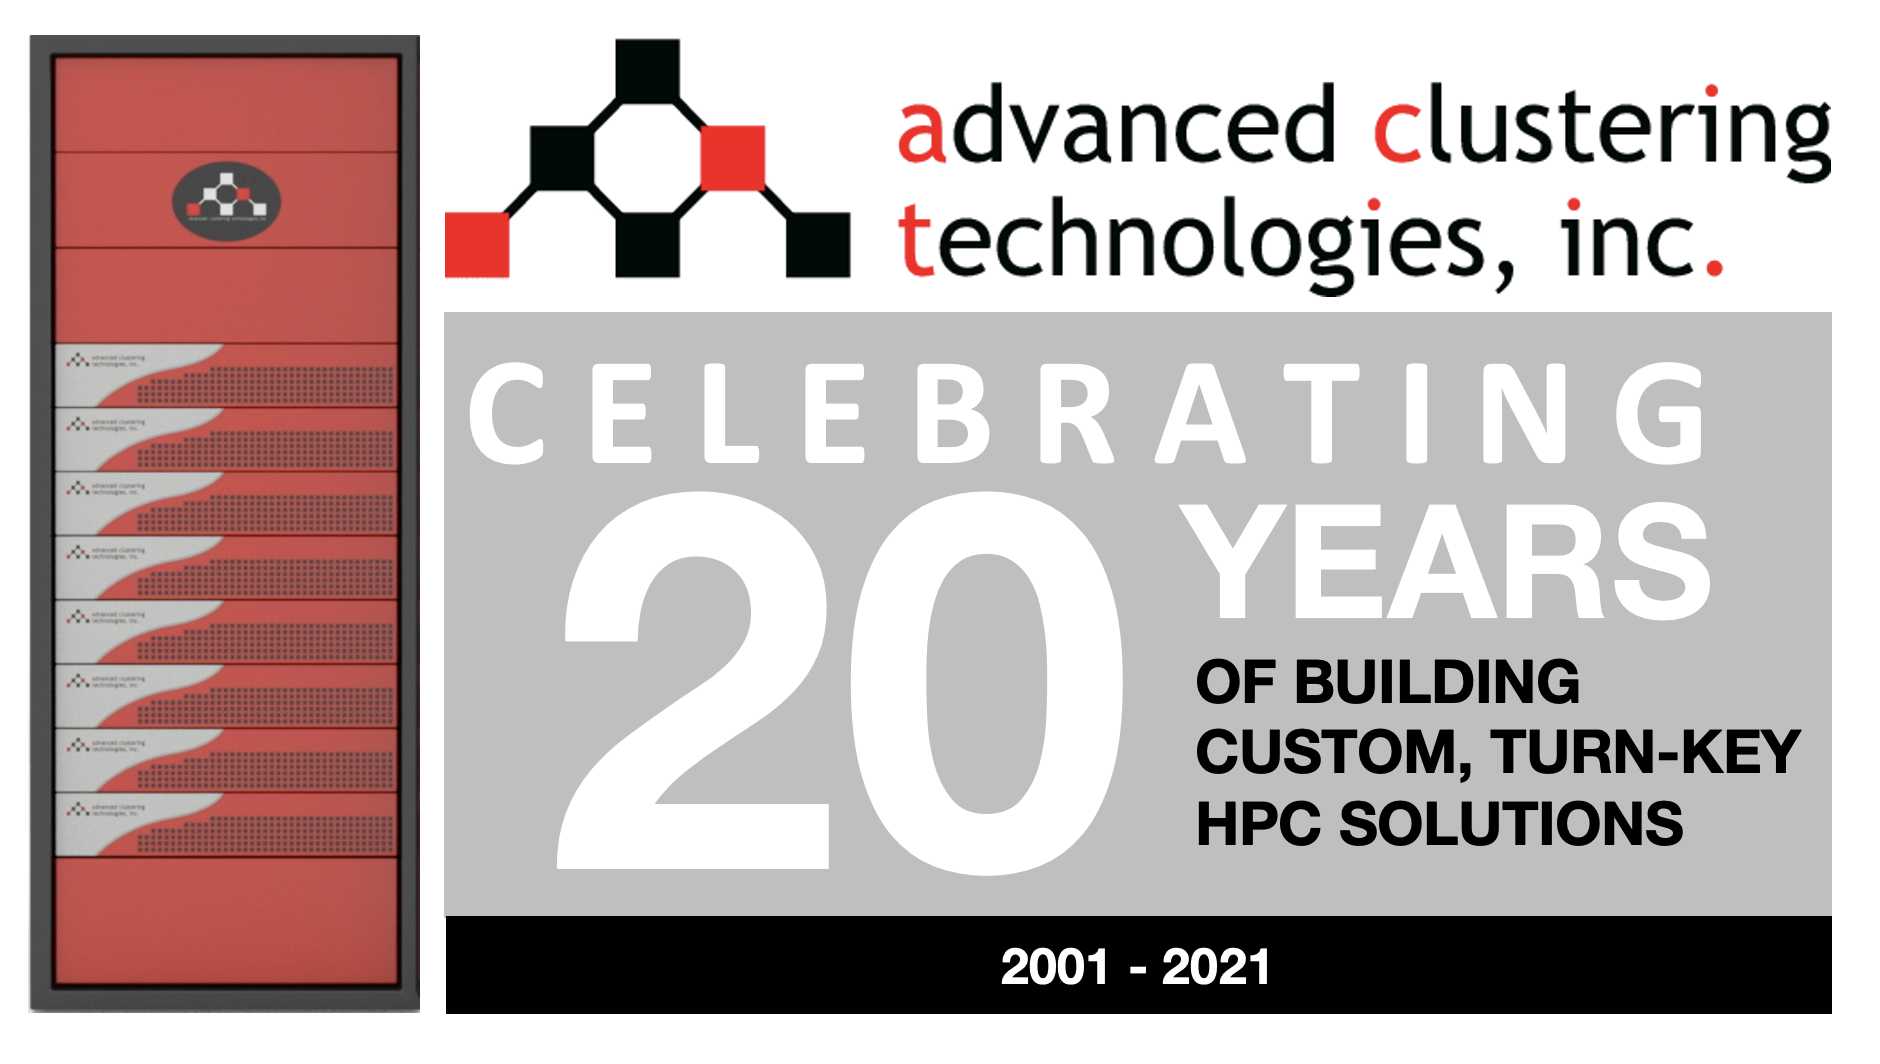 Advanced Clustering Celebrates 20 Years